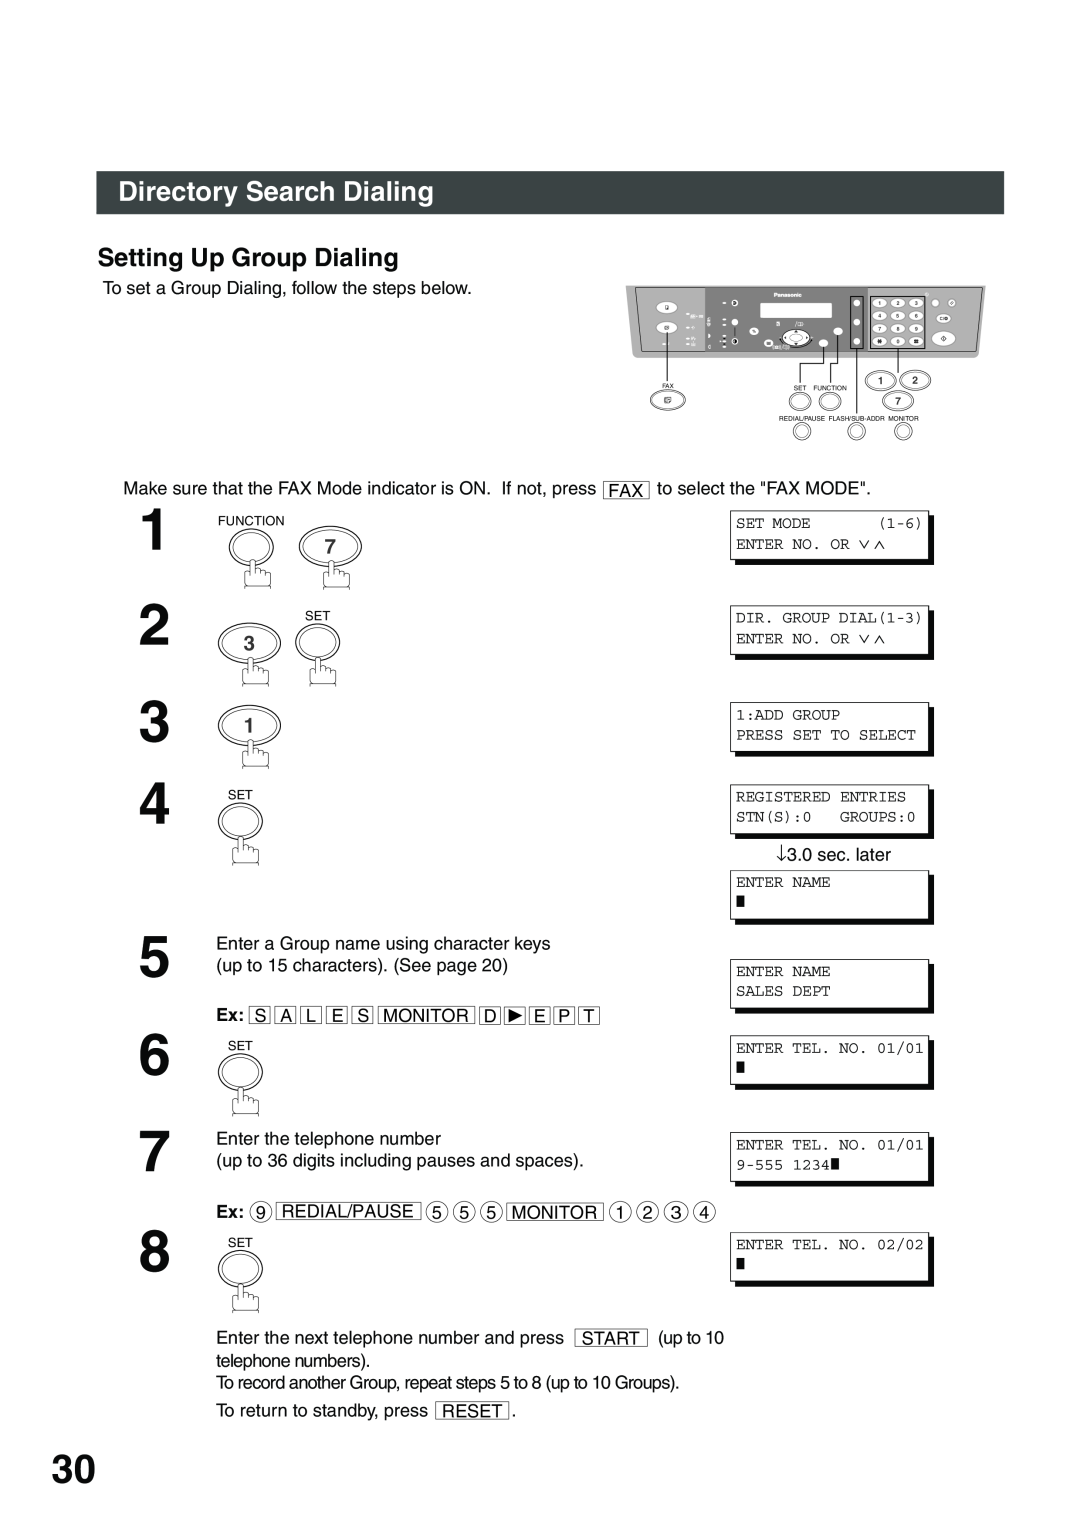 Panasonic DP-135FP appendix Setting Up Group Dialing, Directory Search Dialing 